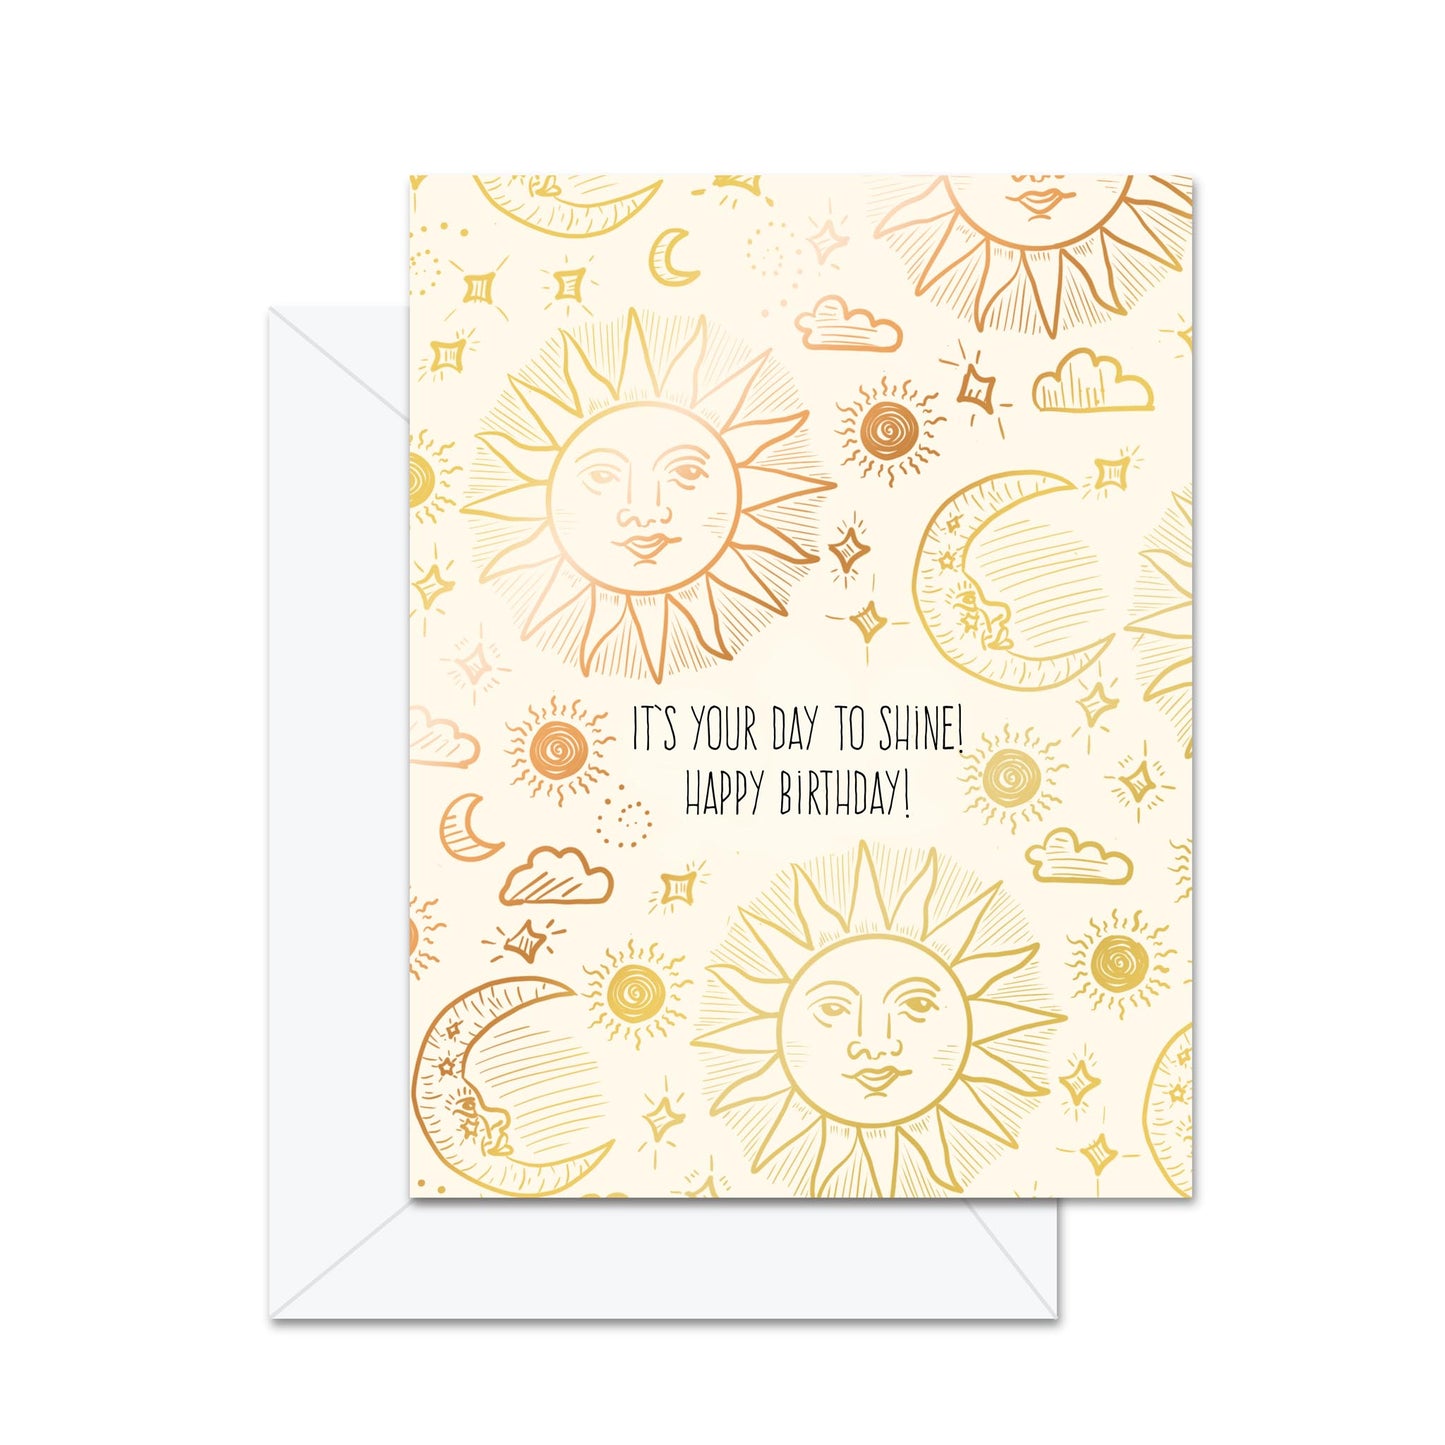 It's Your Day To Shine! Happy Birthday - Greeting Card